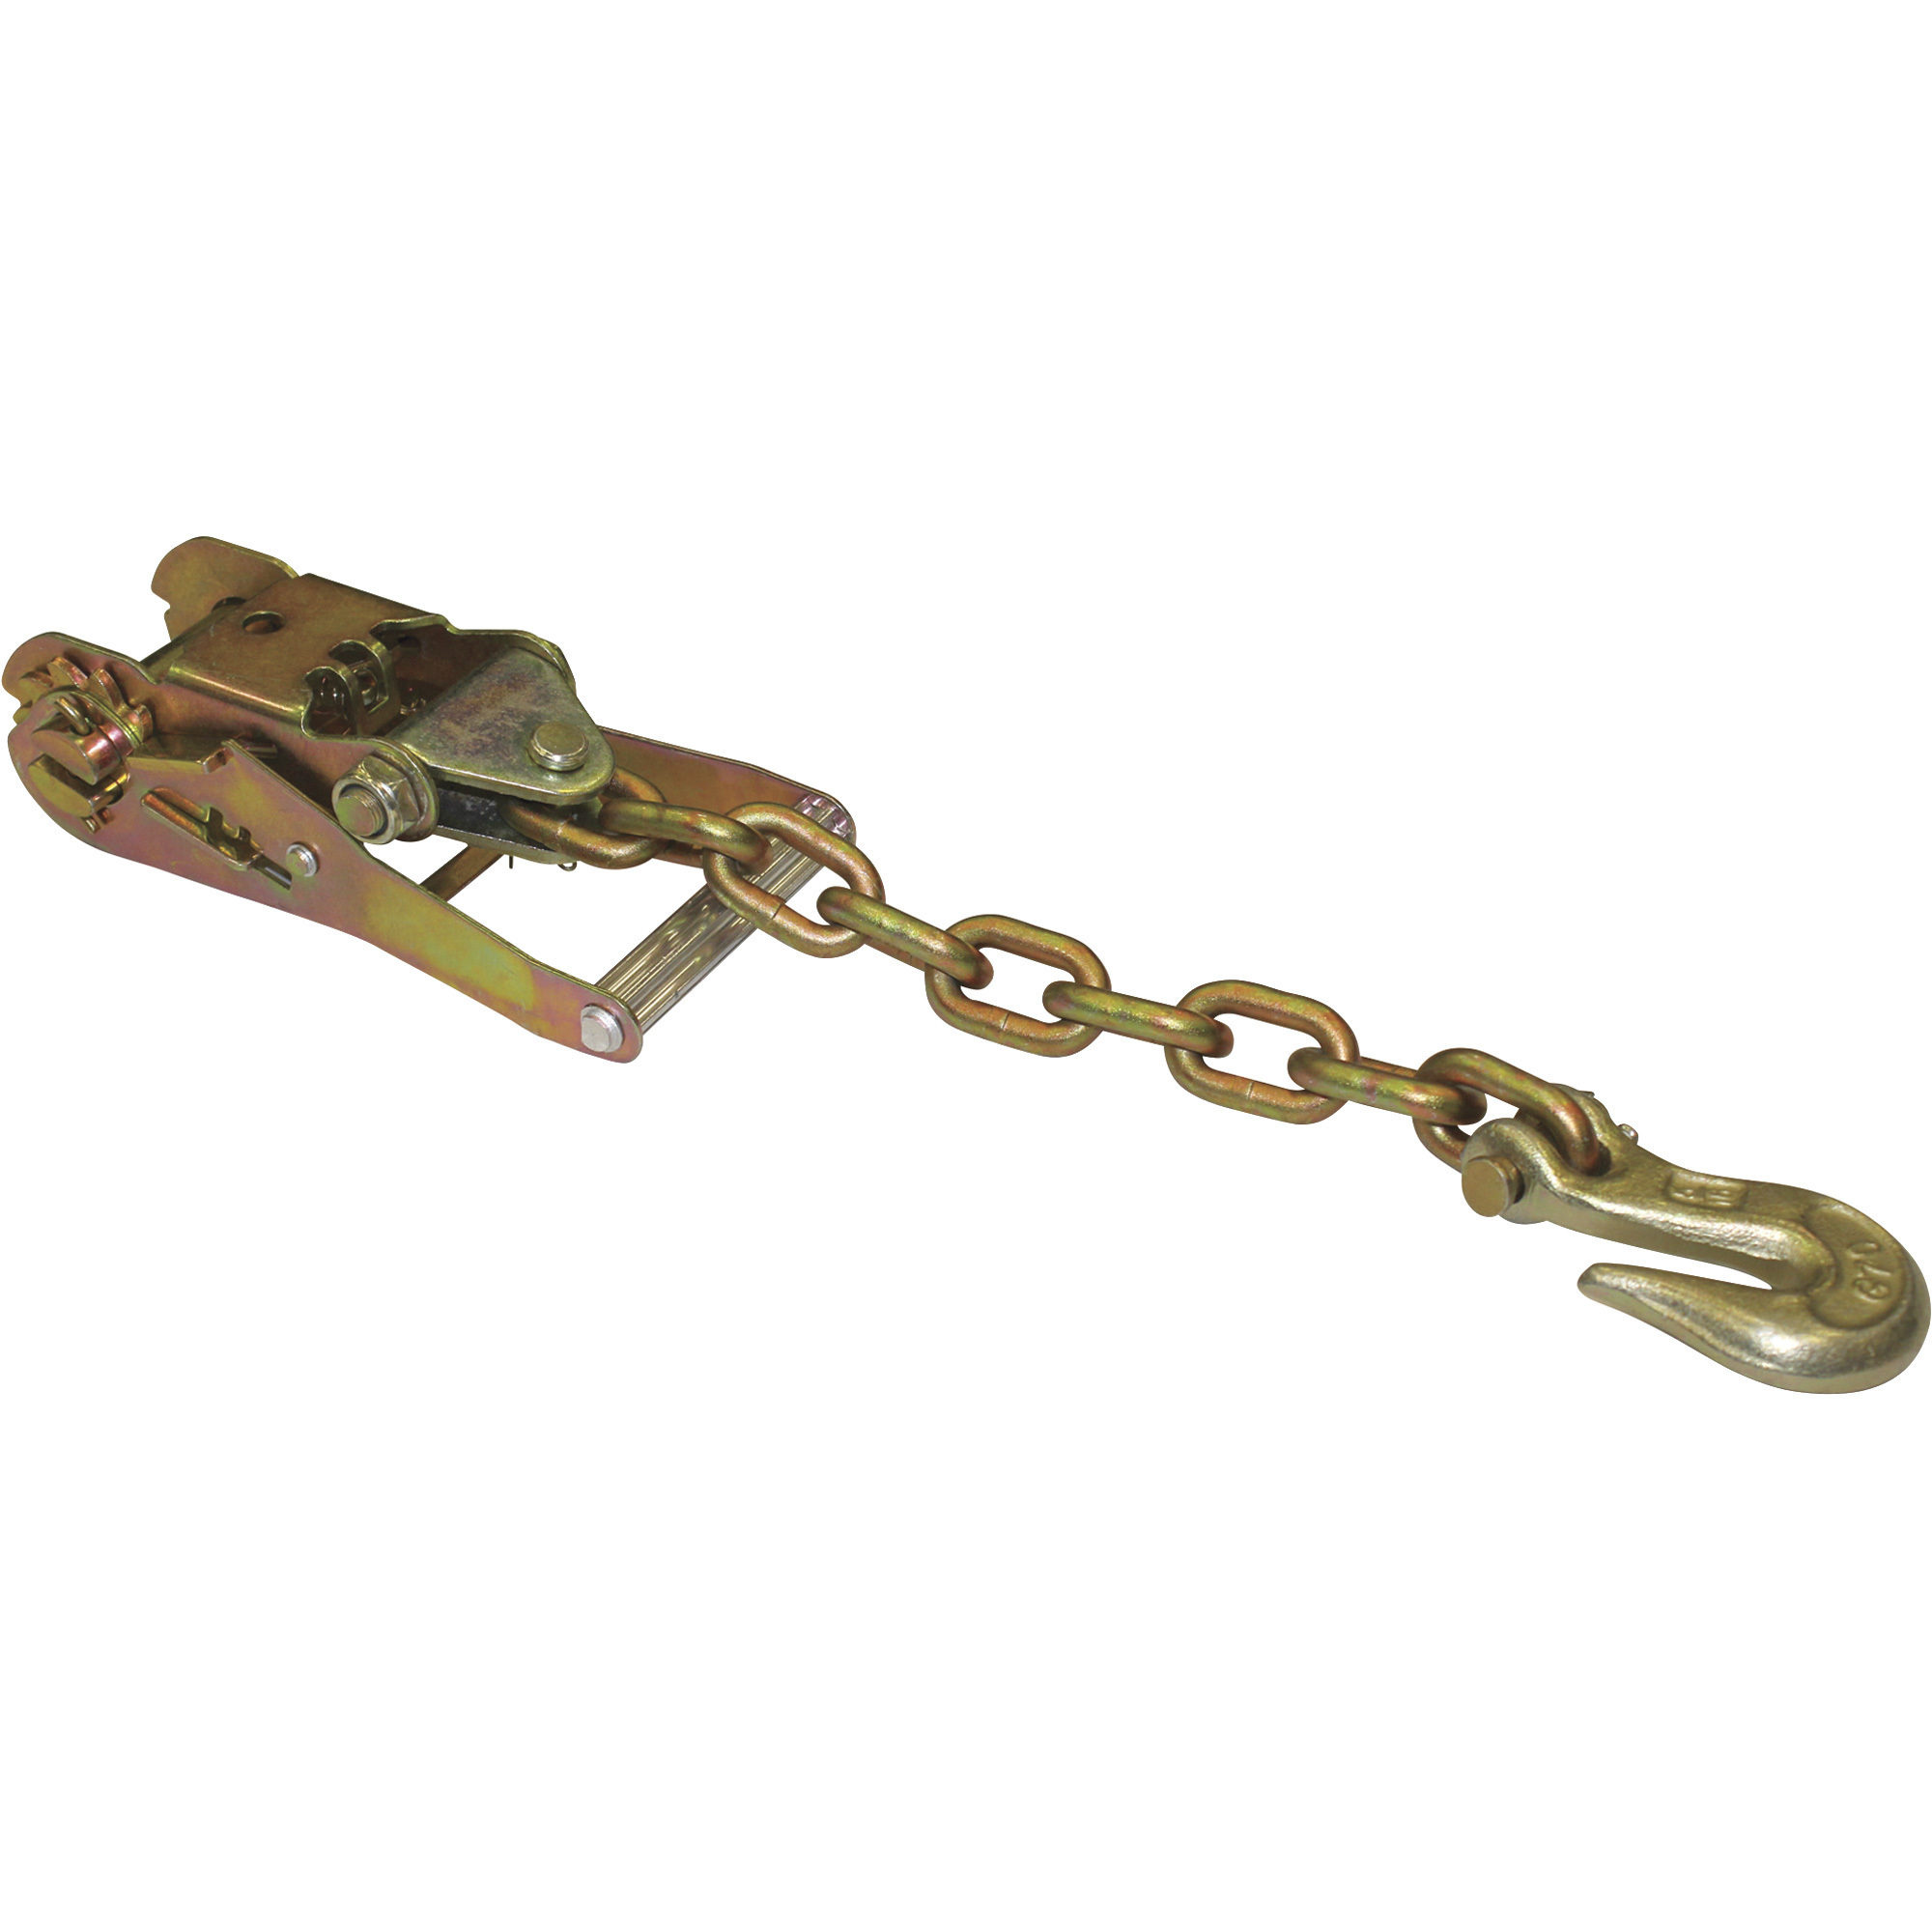 B/A Products 2Inch Ratchet with Chain and Grab Hook, Model 38-100-RG